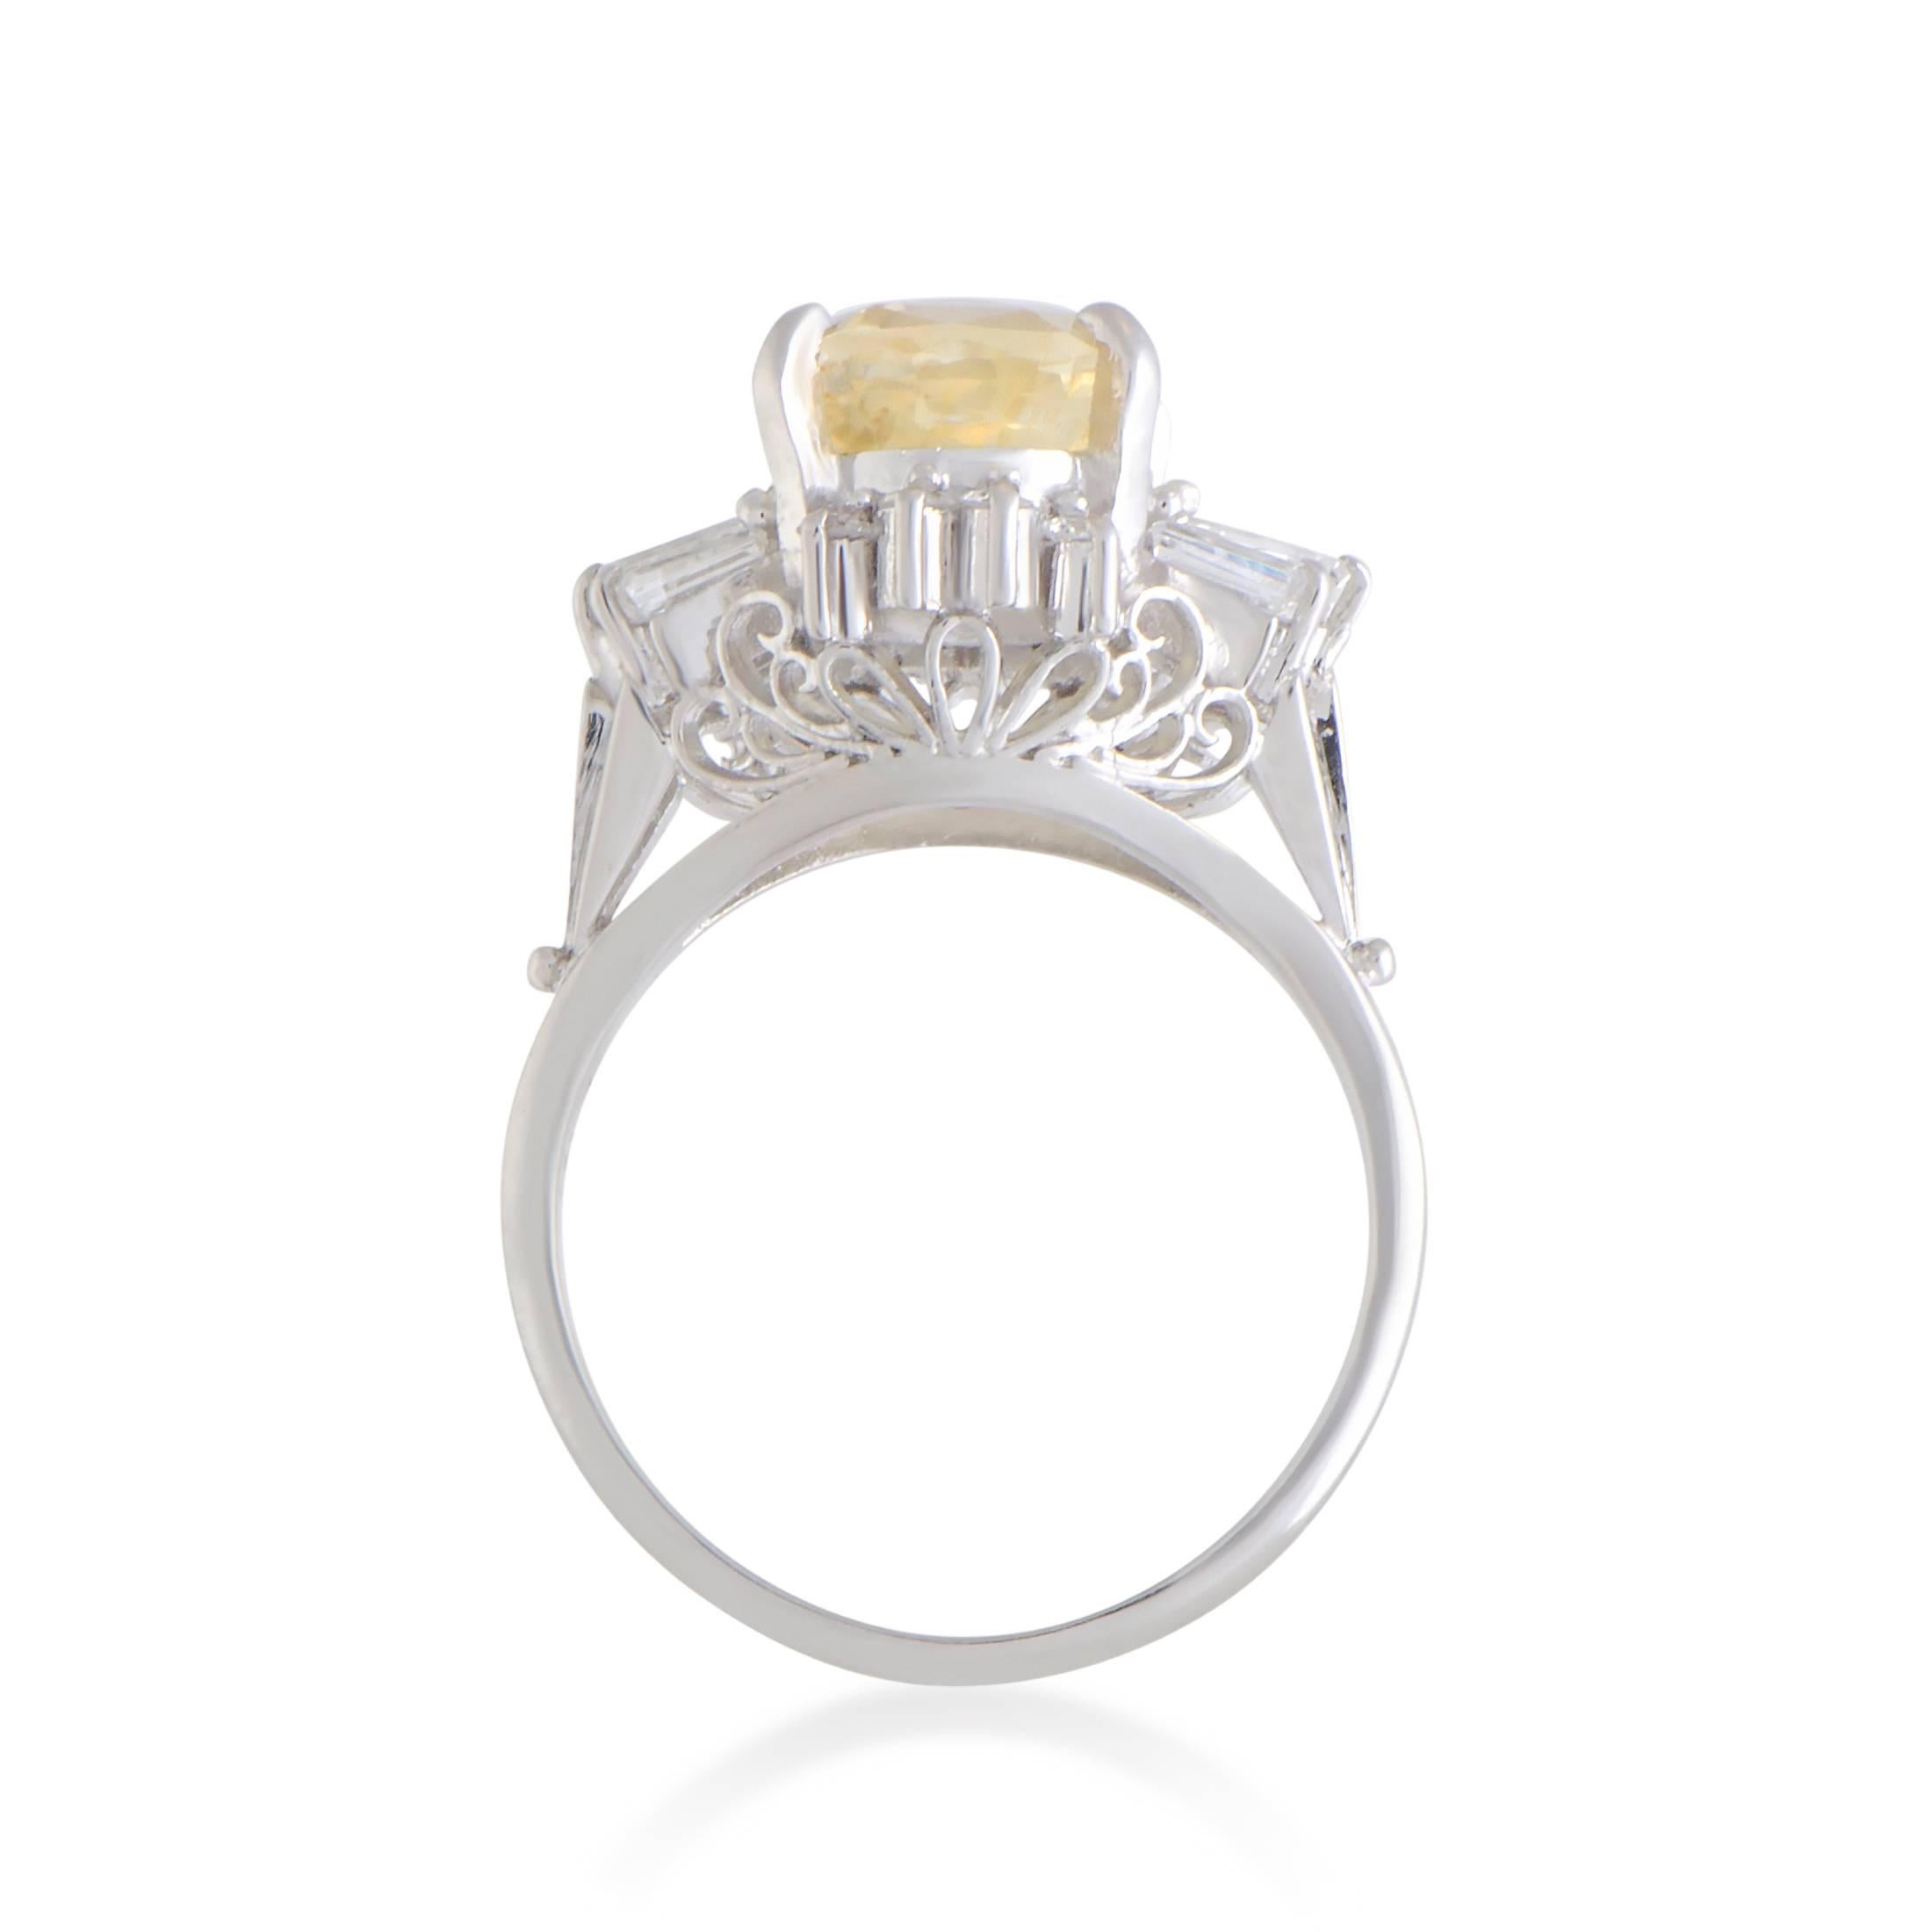 Superbly crafted from elegant platinum and beautifully set with glistening diamonds and a sublime yellow sapphire, this gorgeous ring offers a wonderfully feminine appearance. The diamond stones amount to 0.65 carats, while the sapphire weighs 3.62